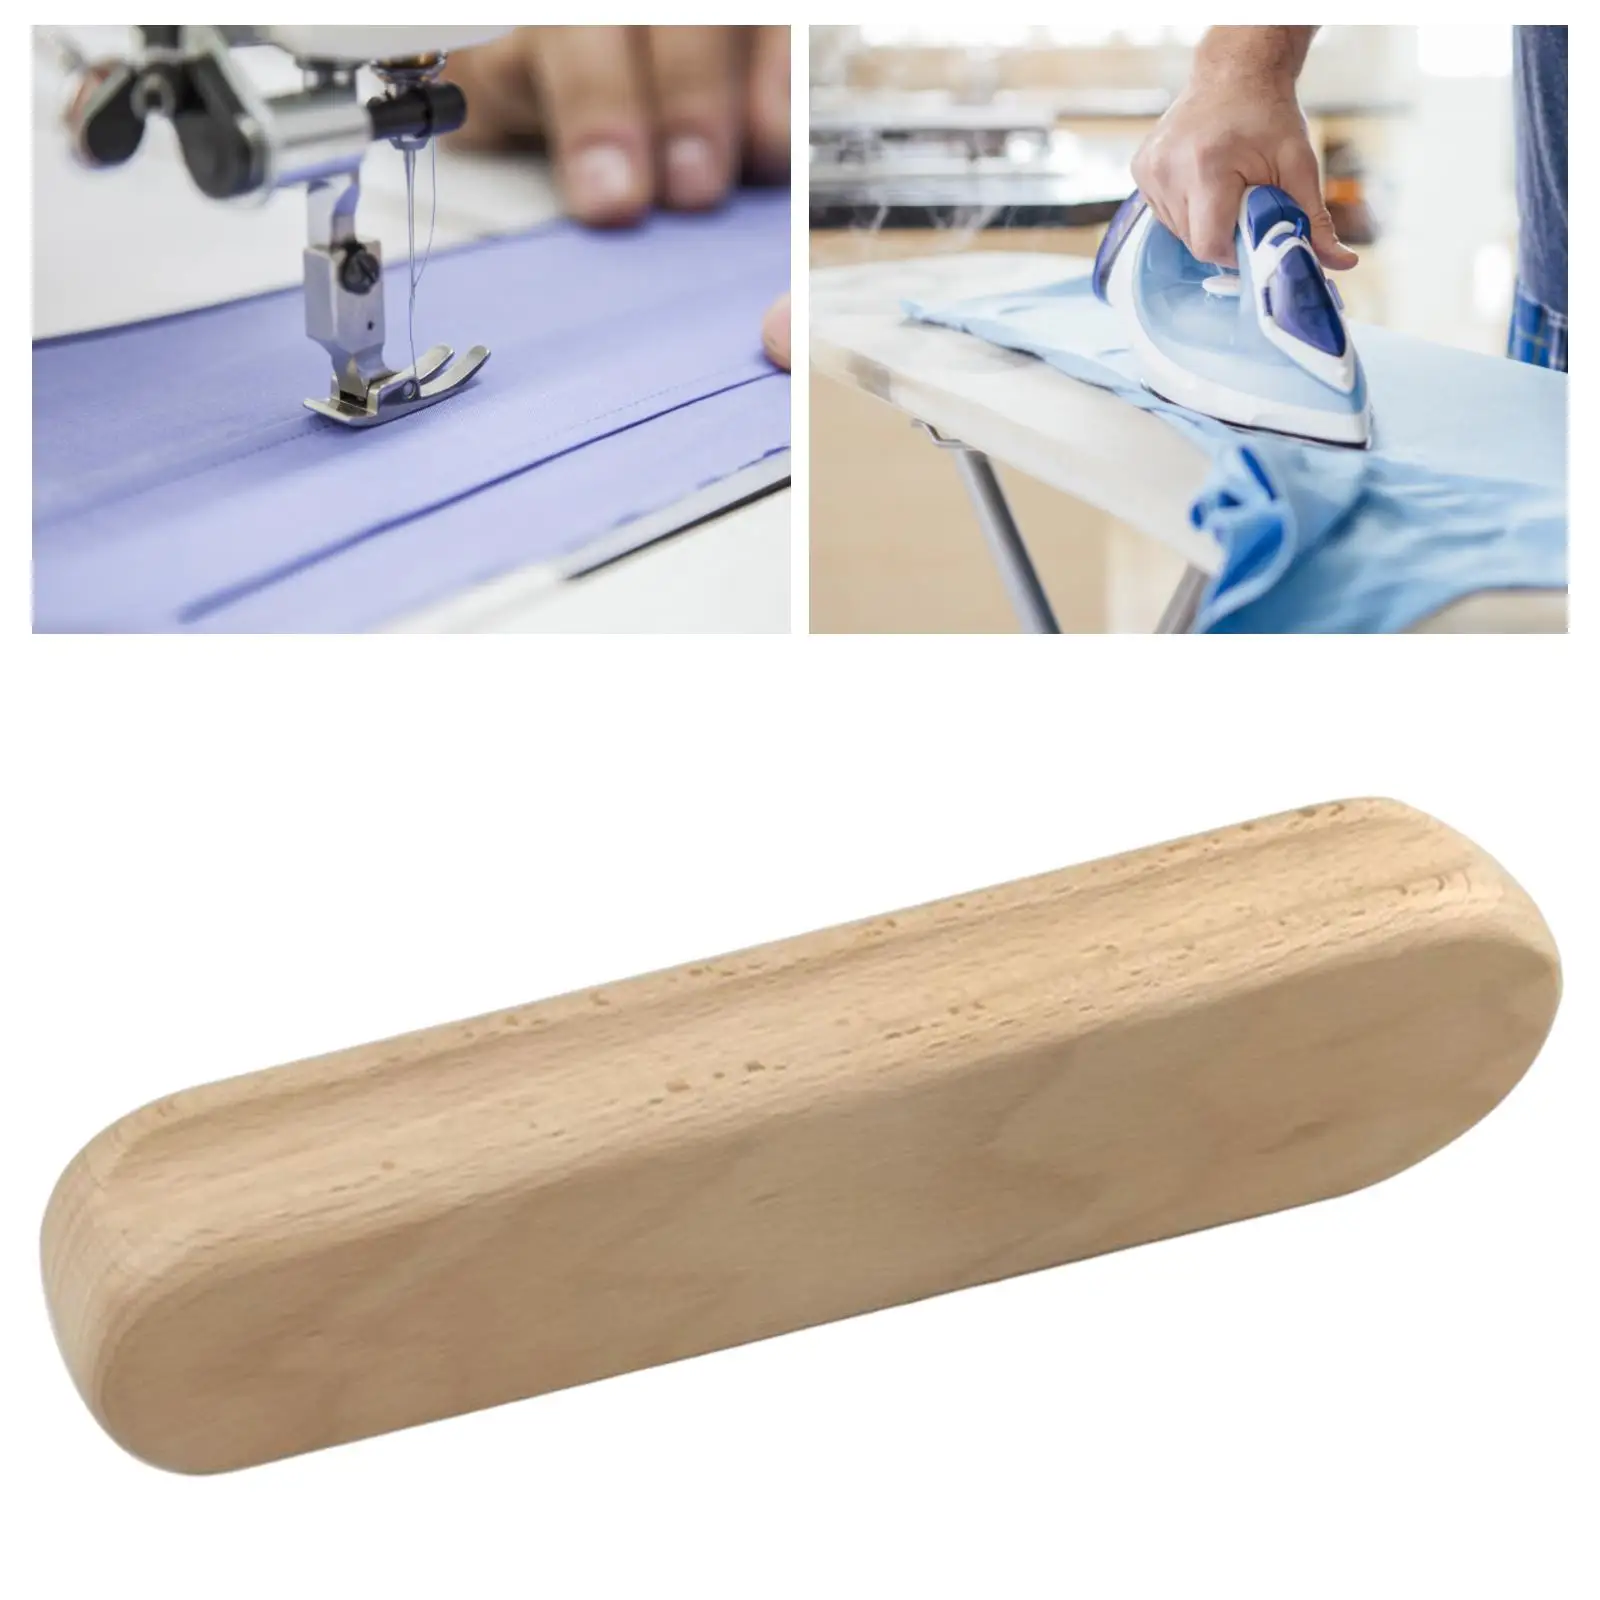 Wooden Tailors Clapper Large Handheld Seam Flattening Tool 24cm Professional Clapper for Sewing Ironing Embroidery Quilting